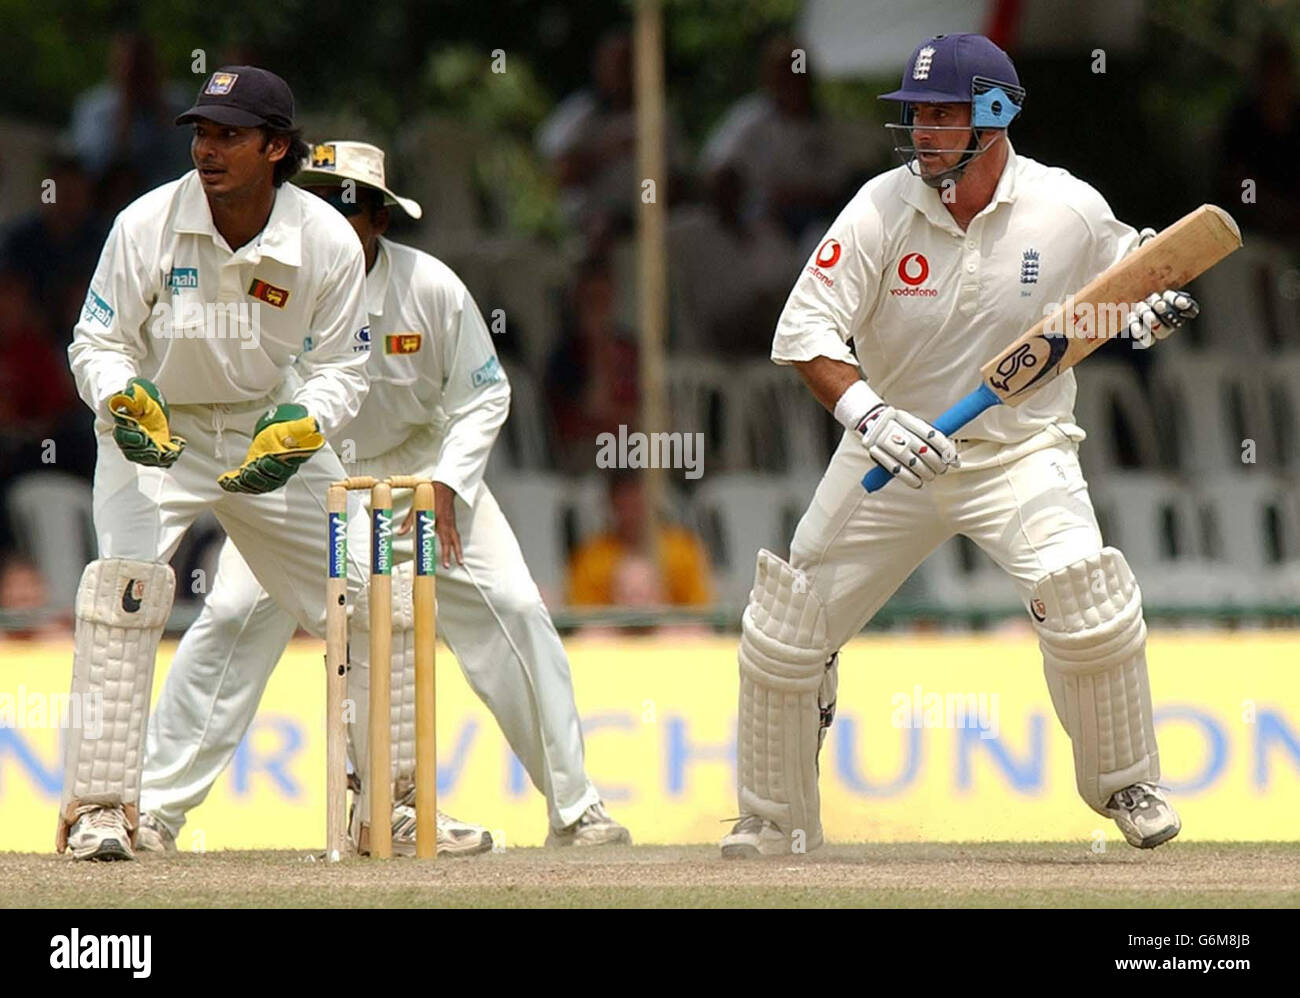 Graham Thorpe (right) pushes the ball past Kumar Sangakkara (left) to score a half century as England continued their first innings against Sri Lanka at the Asgiriya Stadium in Kandy on the third day of the second Test in the three match series. Stock Photo